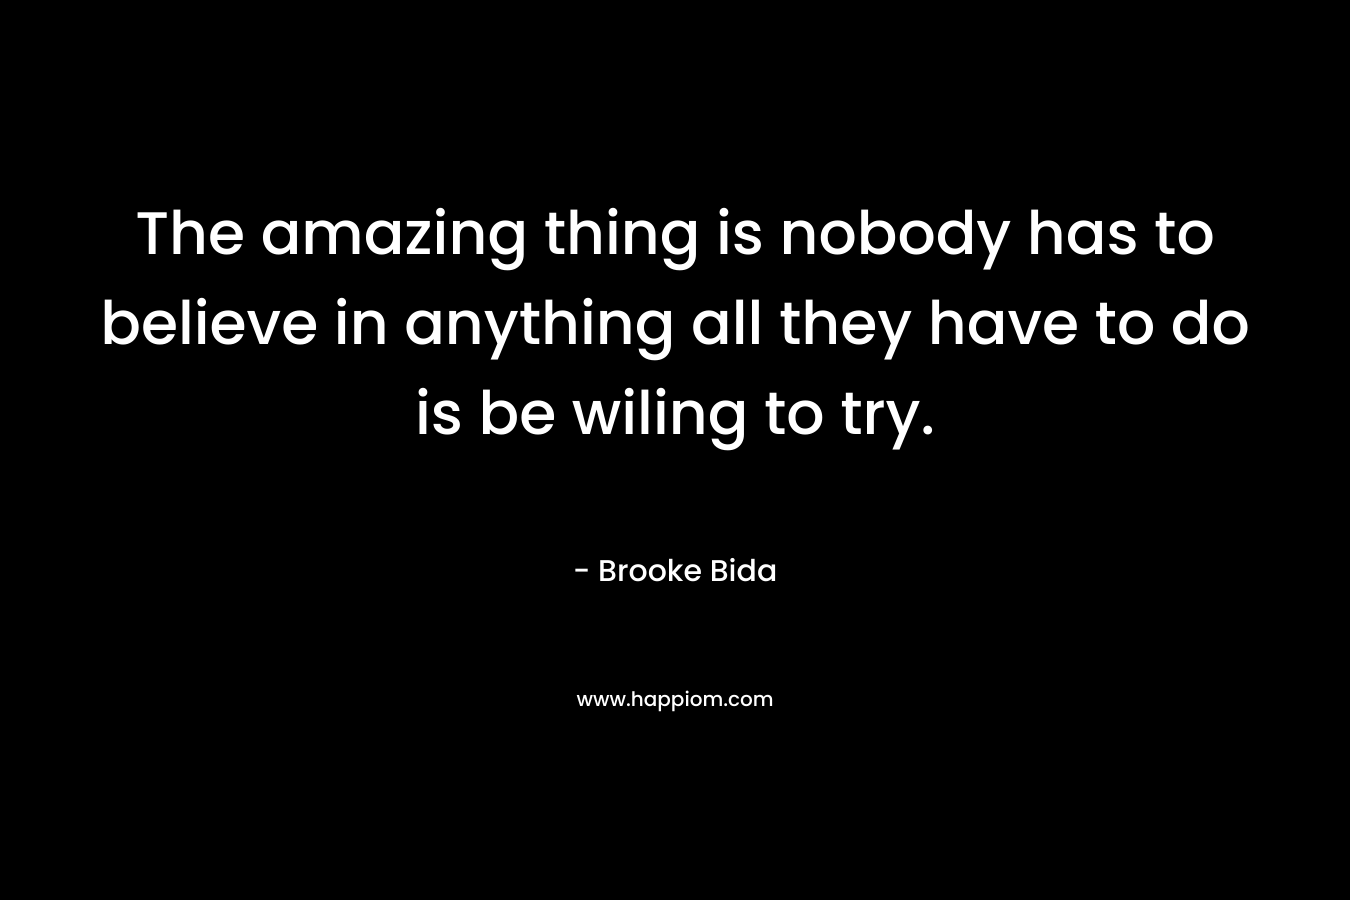 The amazing thing is nobody has to believe in anything all they have to do is be wiling to try.